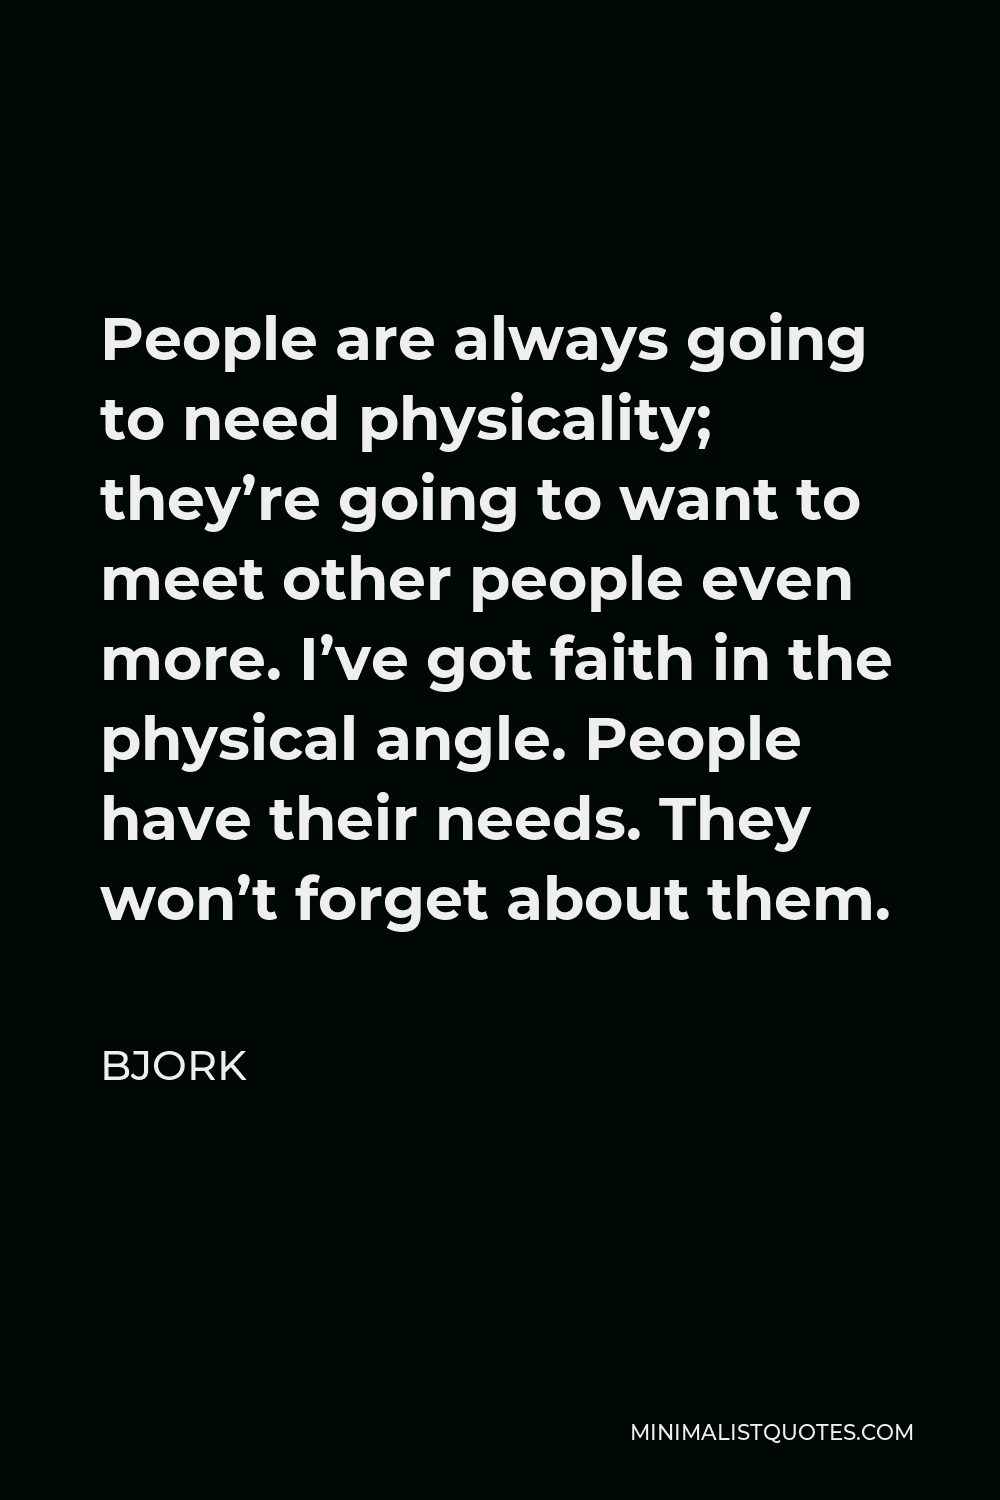 Bjork Quote - People are always going to need physicality; they’re going to want to meet other people even more. I’ve got faith in the physical angle. People have their needs. They won’t forget about them.